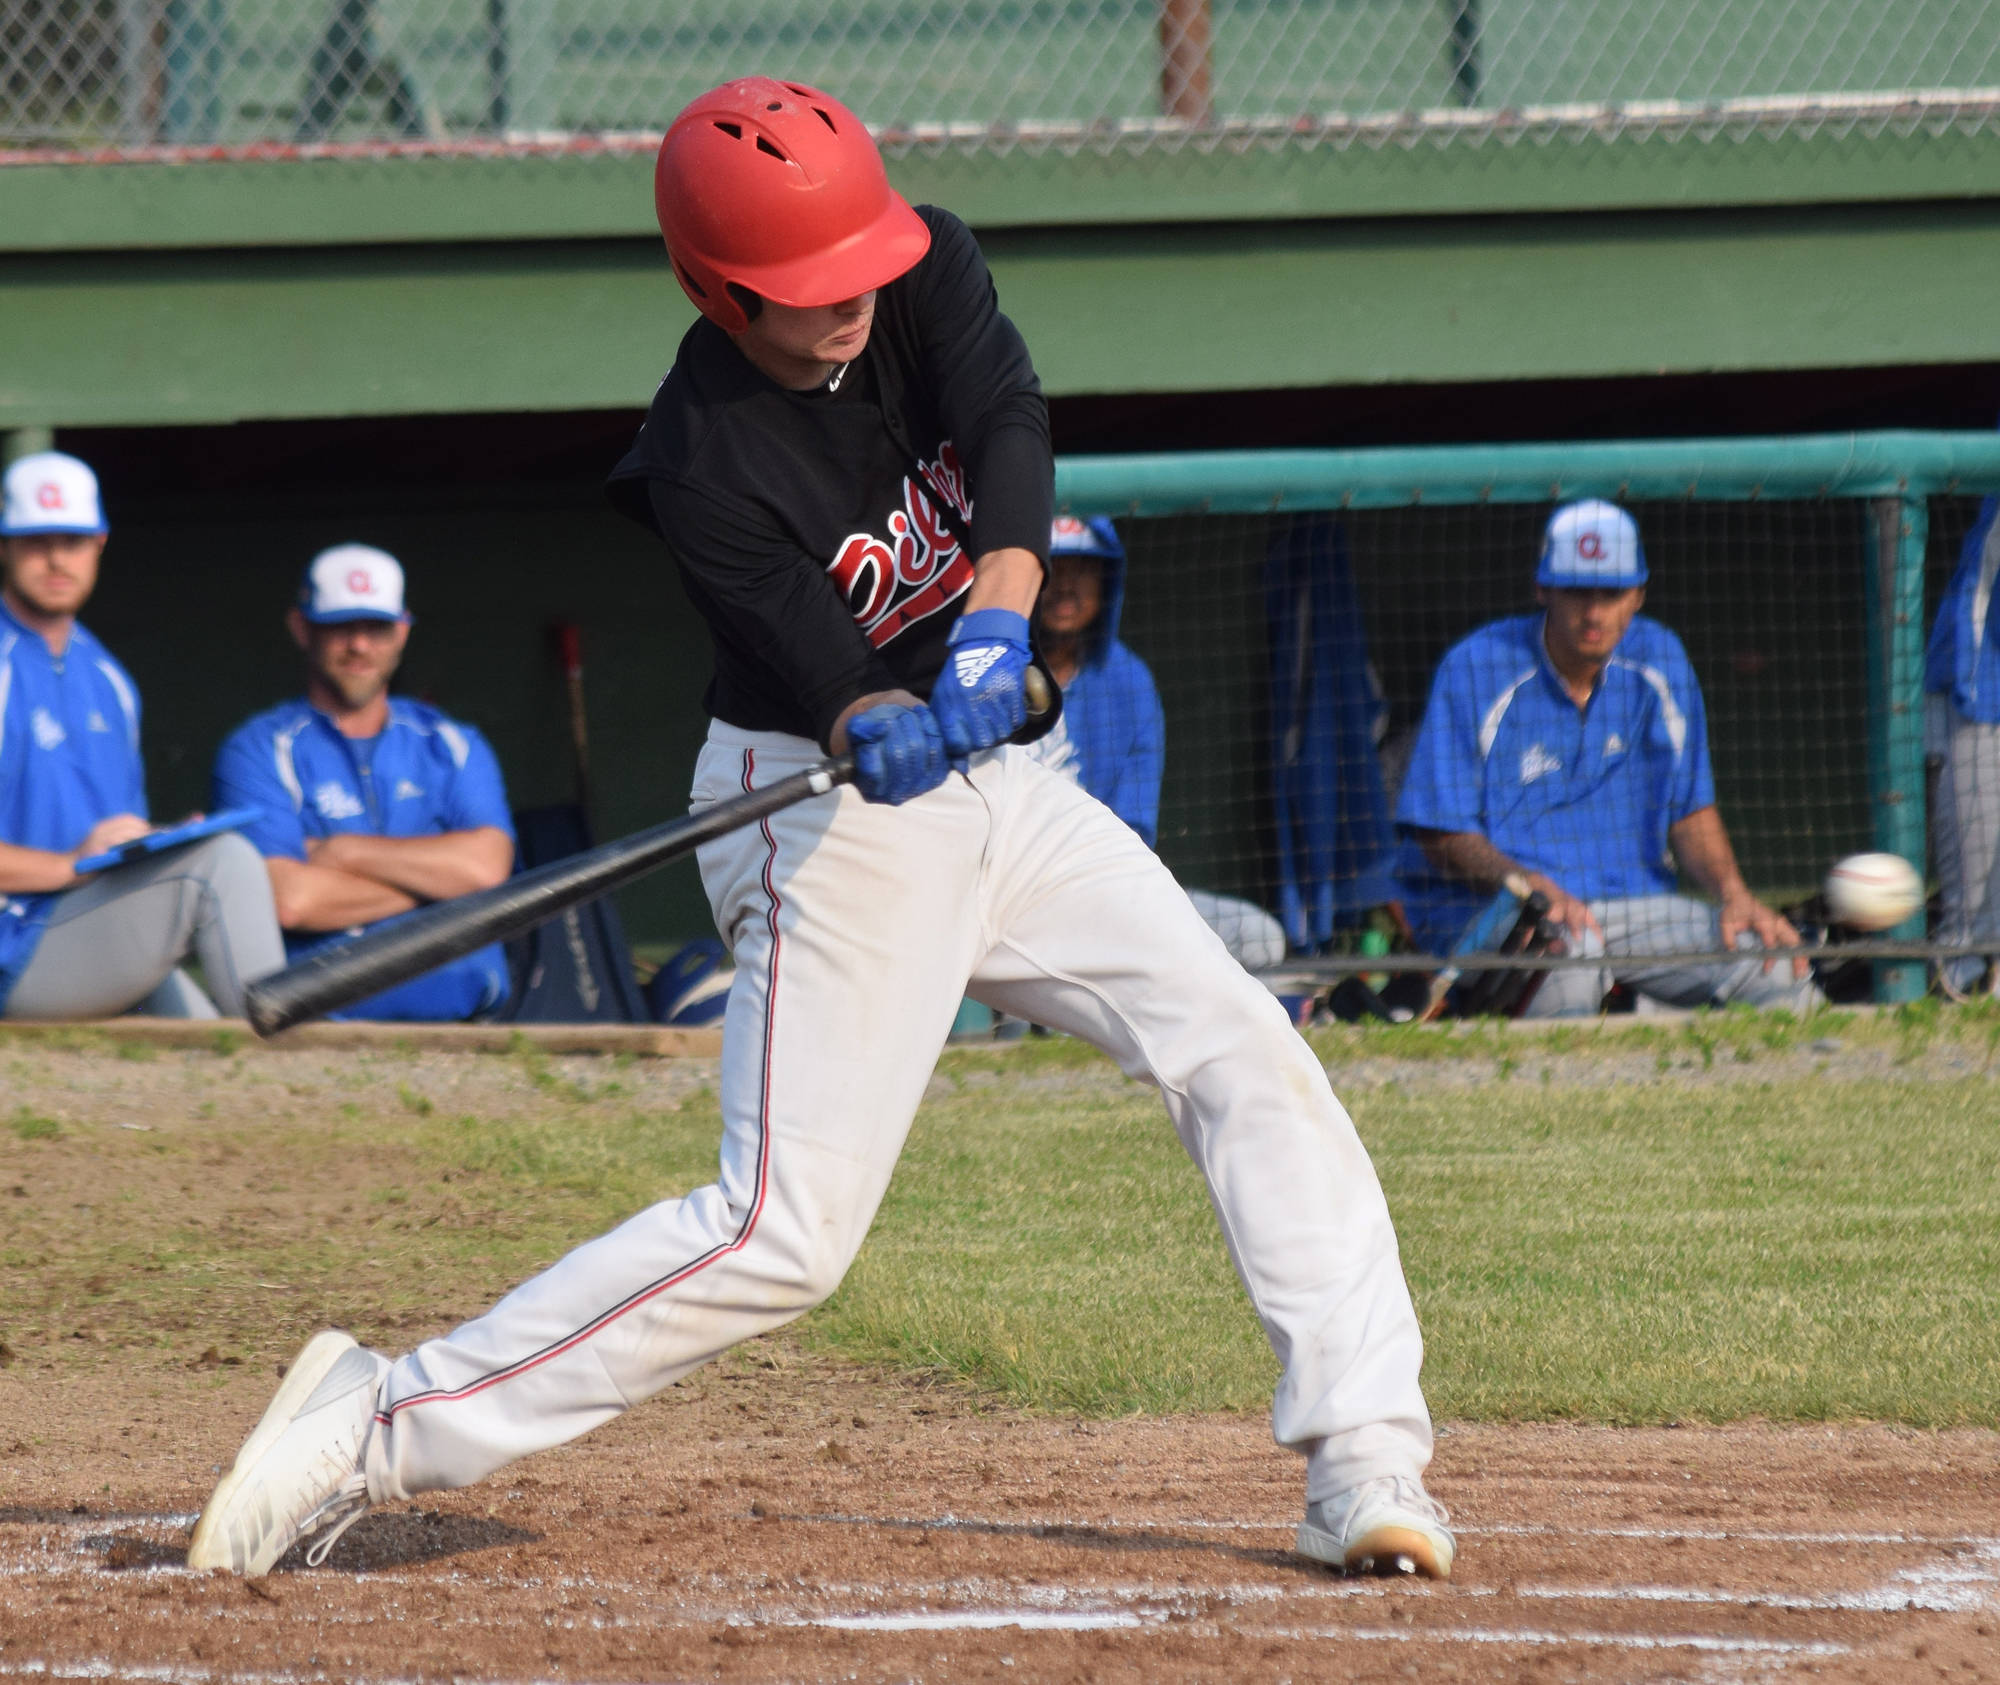 Oilers batter Travis Bohall swings at a pitch from the Anchorage Glacier Pilots Friday, June 28, 2019, at Coral Seymour Memorial Park in Kenai. (Photo by Joey Klecka/Peninsula Clarion)